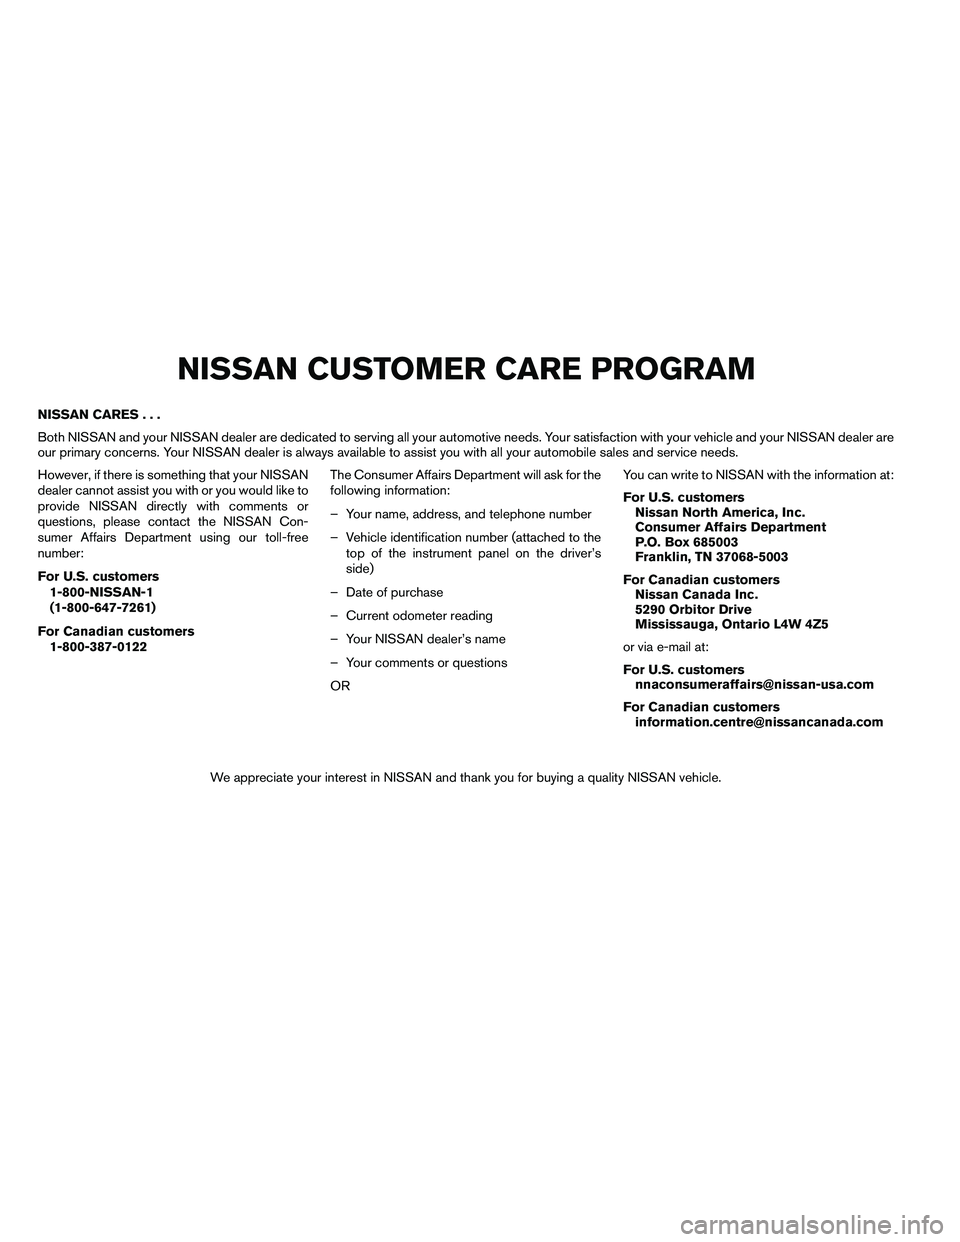 NISSAN ARMADA PLATINUM 2011  Owners Manual NISSAN CARES...
Both NISSAN and your NISSAN dealer are dedicated to serving all your automotive needs. Your satisfaction with your vehicle and your NISSAN dealer are
our primary concerns. Your NISSAN 